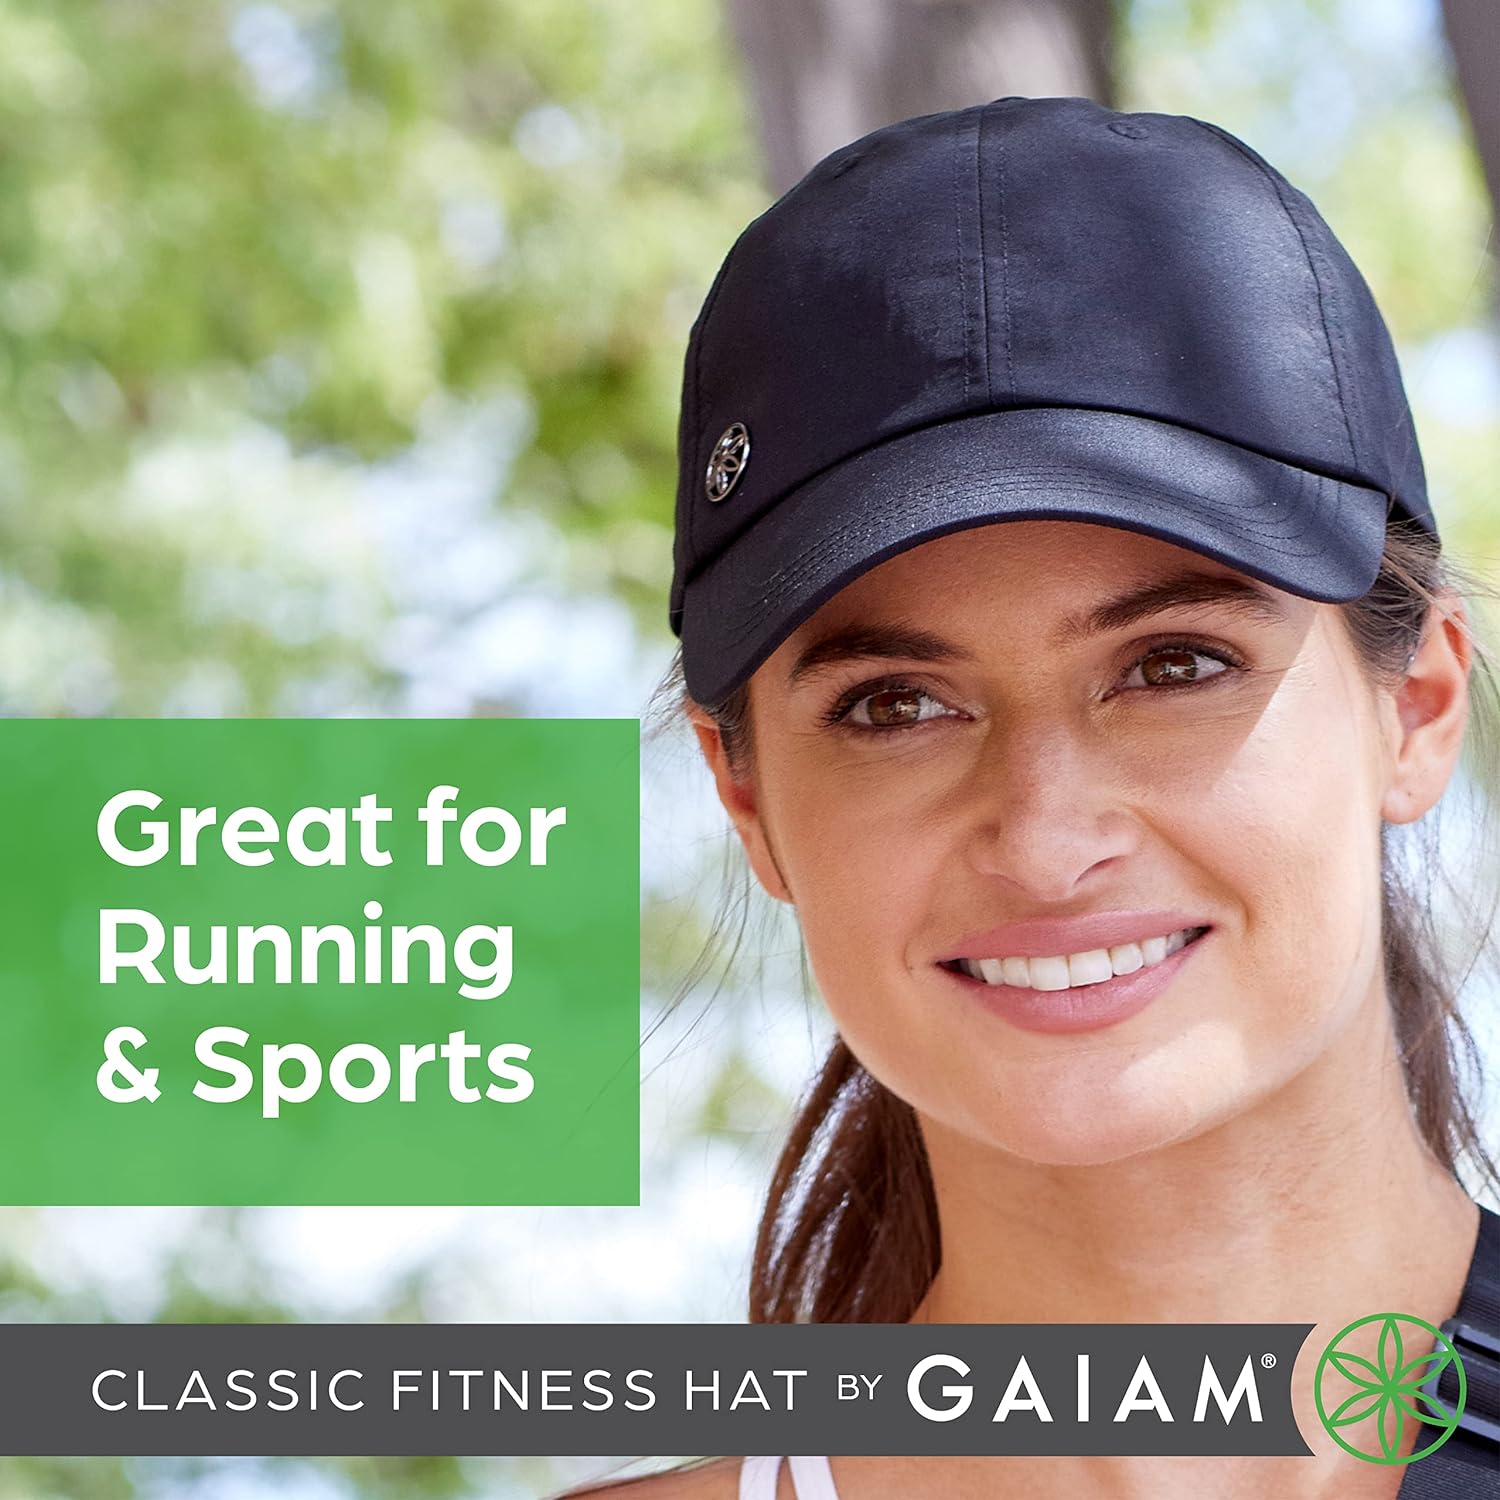 Gaiam Womens Classic Fitness Running Hat - Ponytail Hats with Quick-Dry Sweatband for Hiking  Summer Beach Vacation